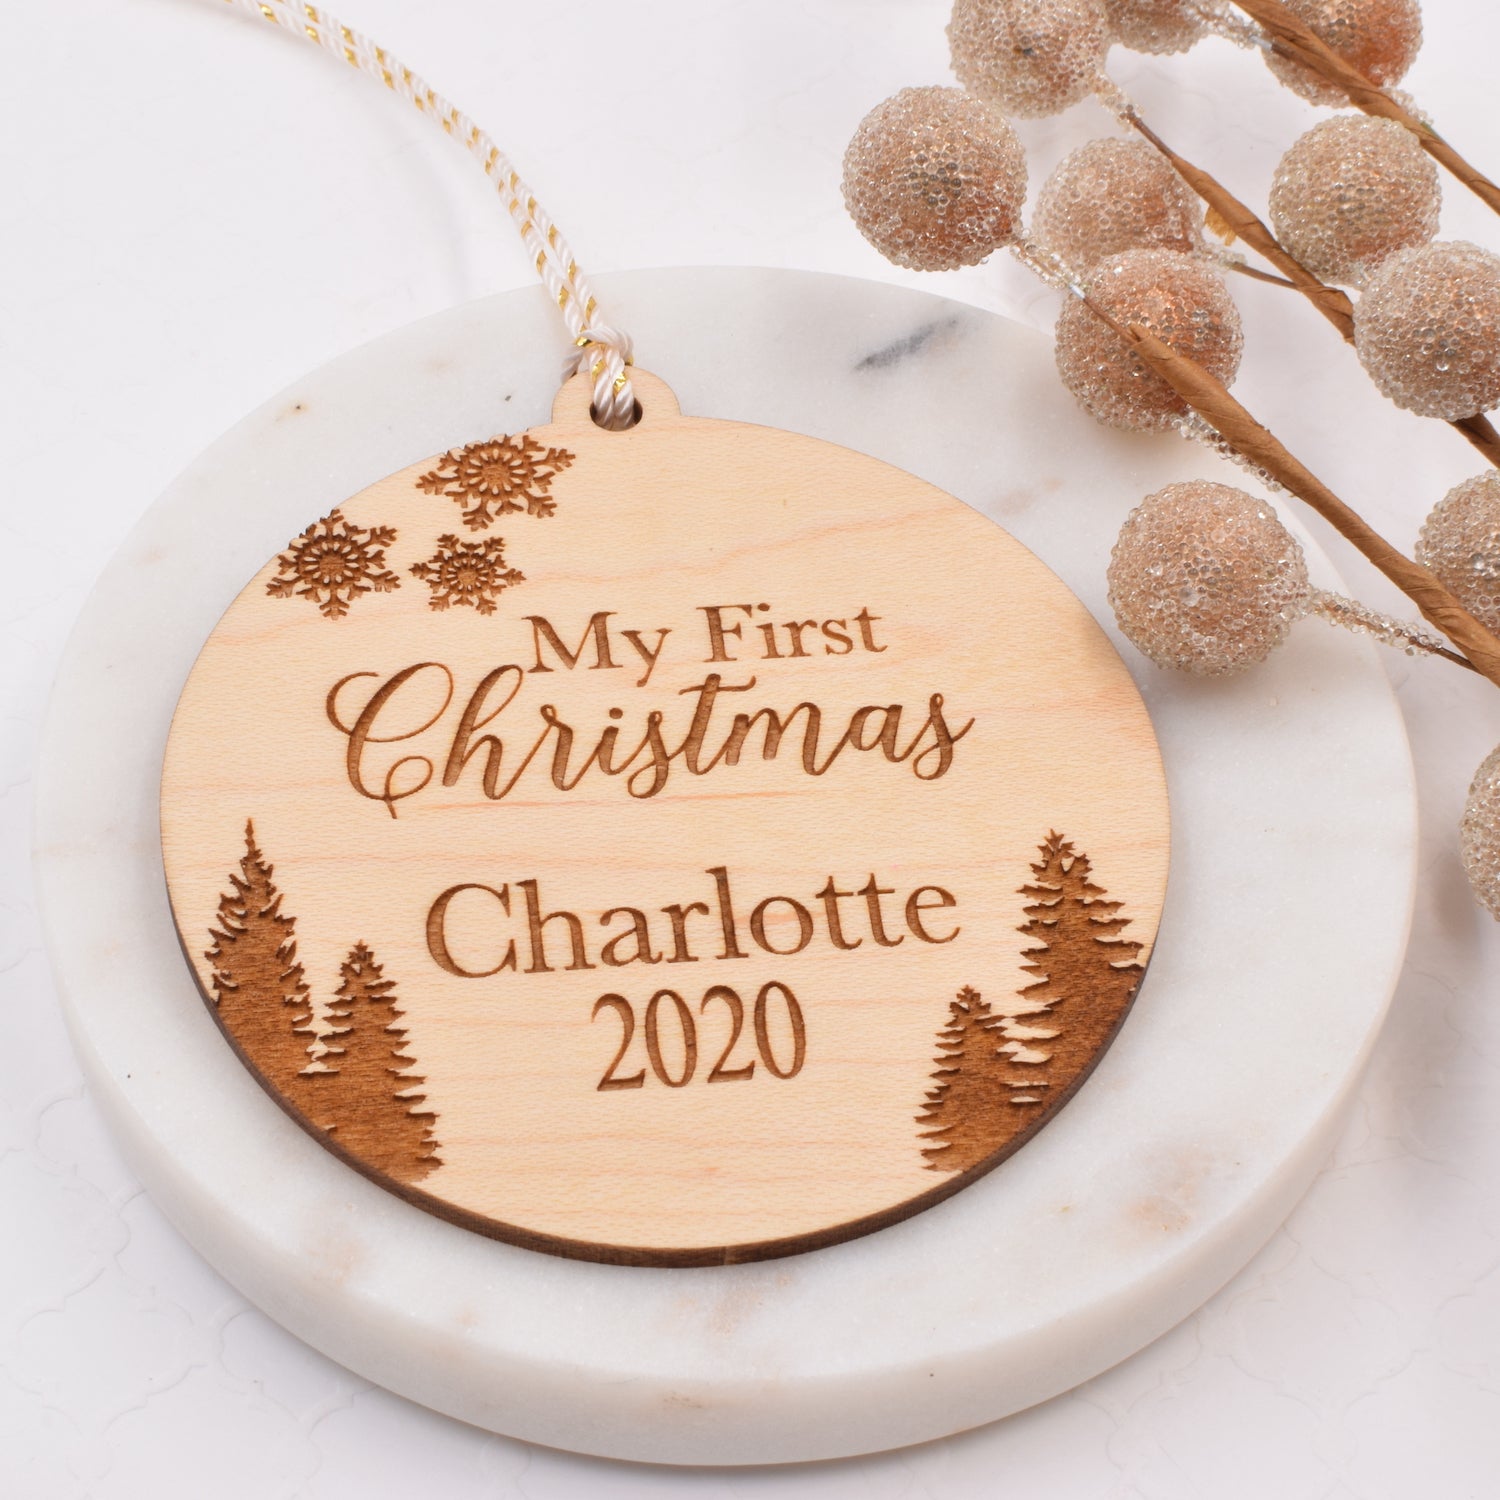 My First Christmas Personalized Wood Ornament